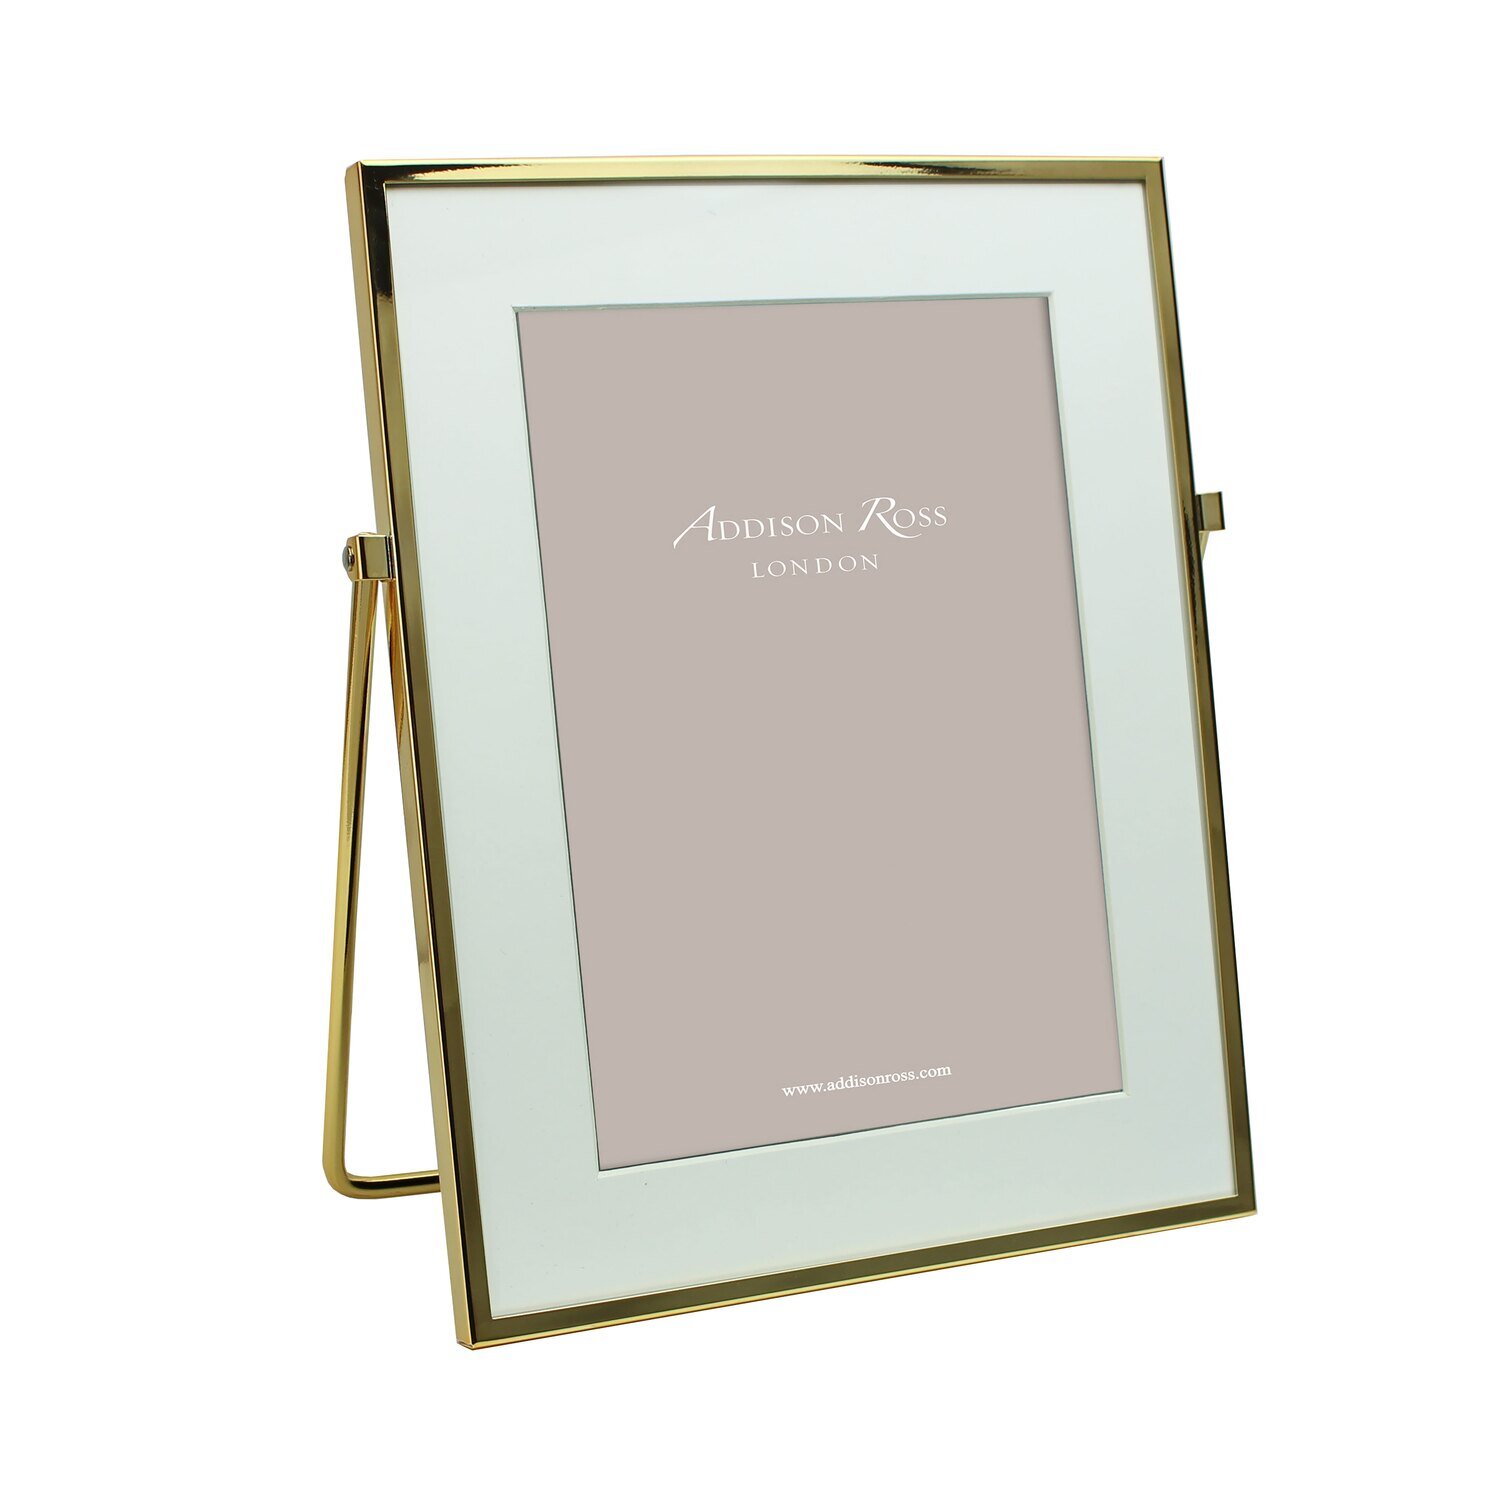 Addison Ross 8 x 10 Inch Gold with Easel Leg Picture Frame Gold FR3570